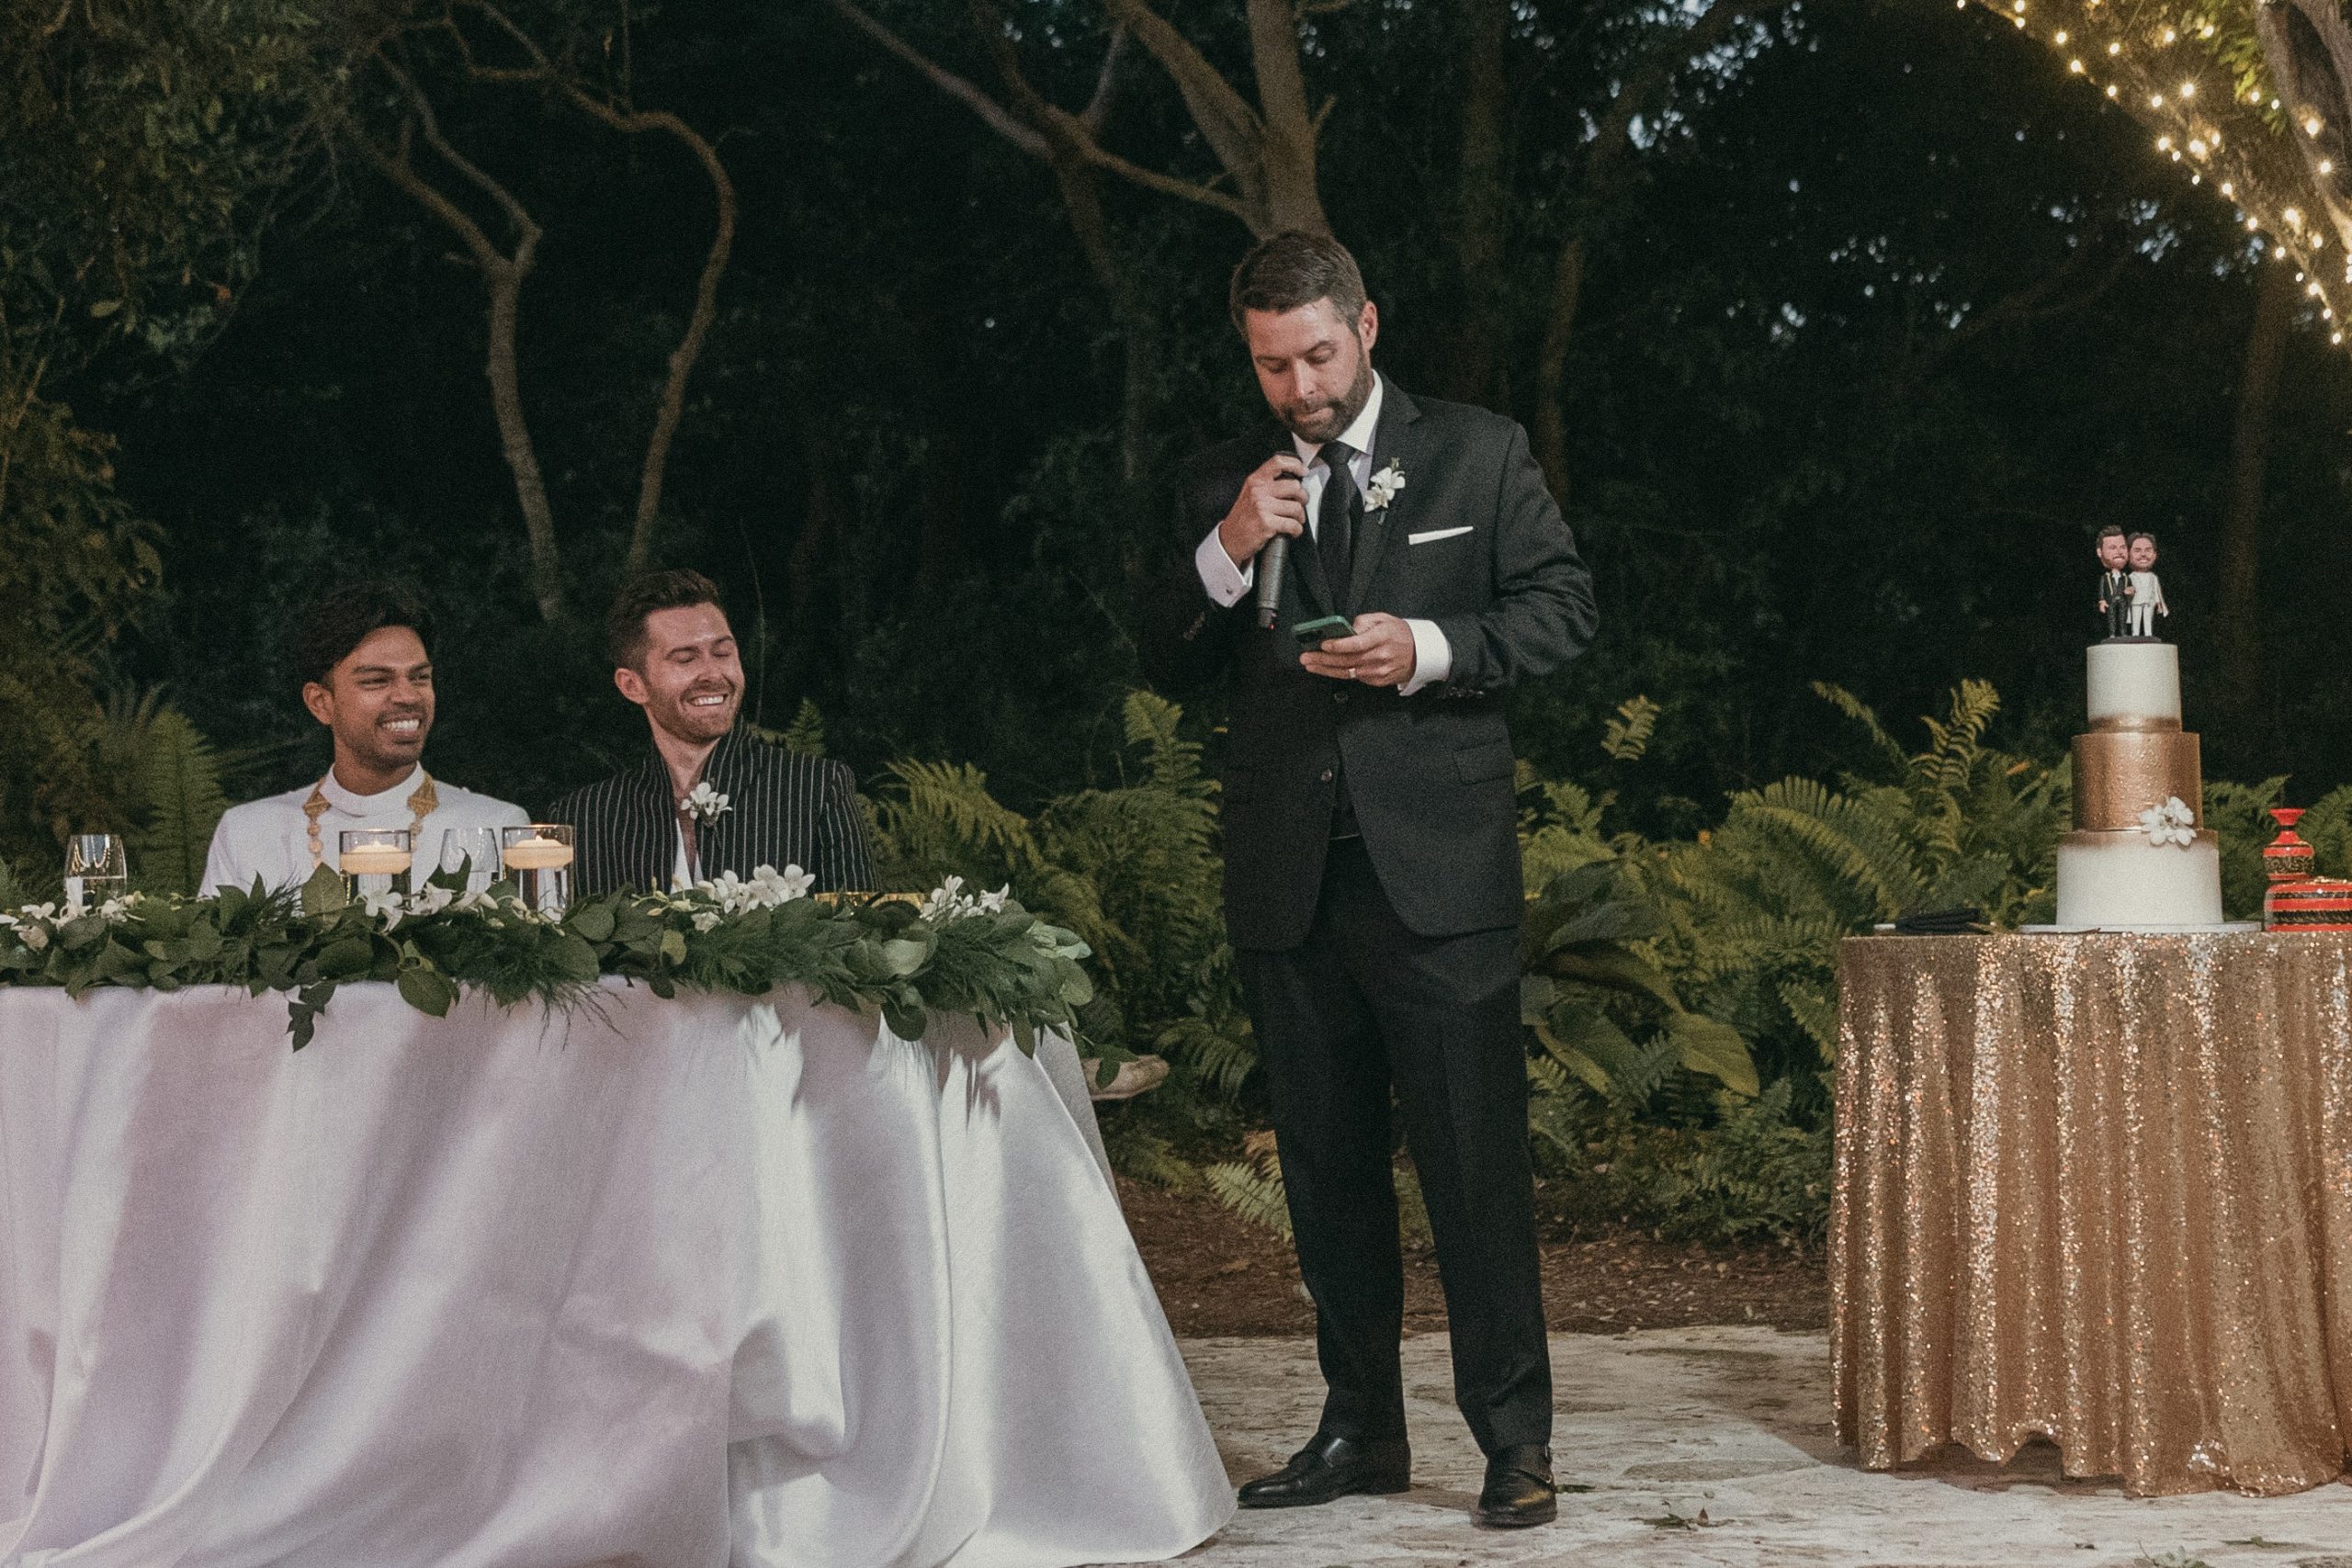 A guest giving a wedding speech at the historic courtyard while the grooms sit at the sweetheart's table to the guests' left. A wedding cake on a cake table is visible to the right,